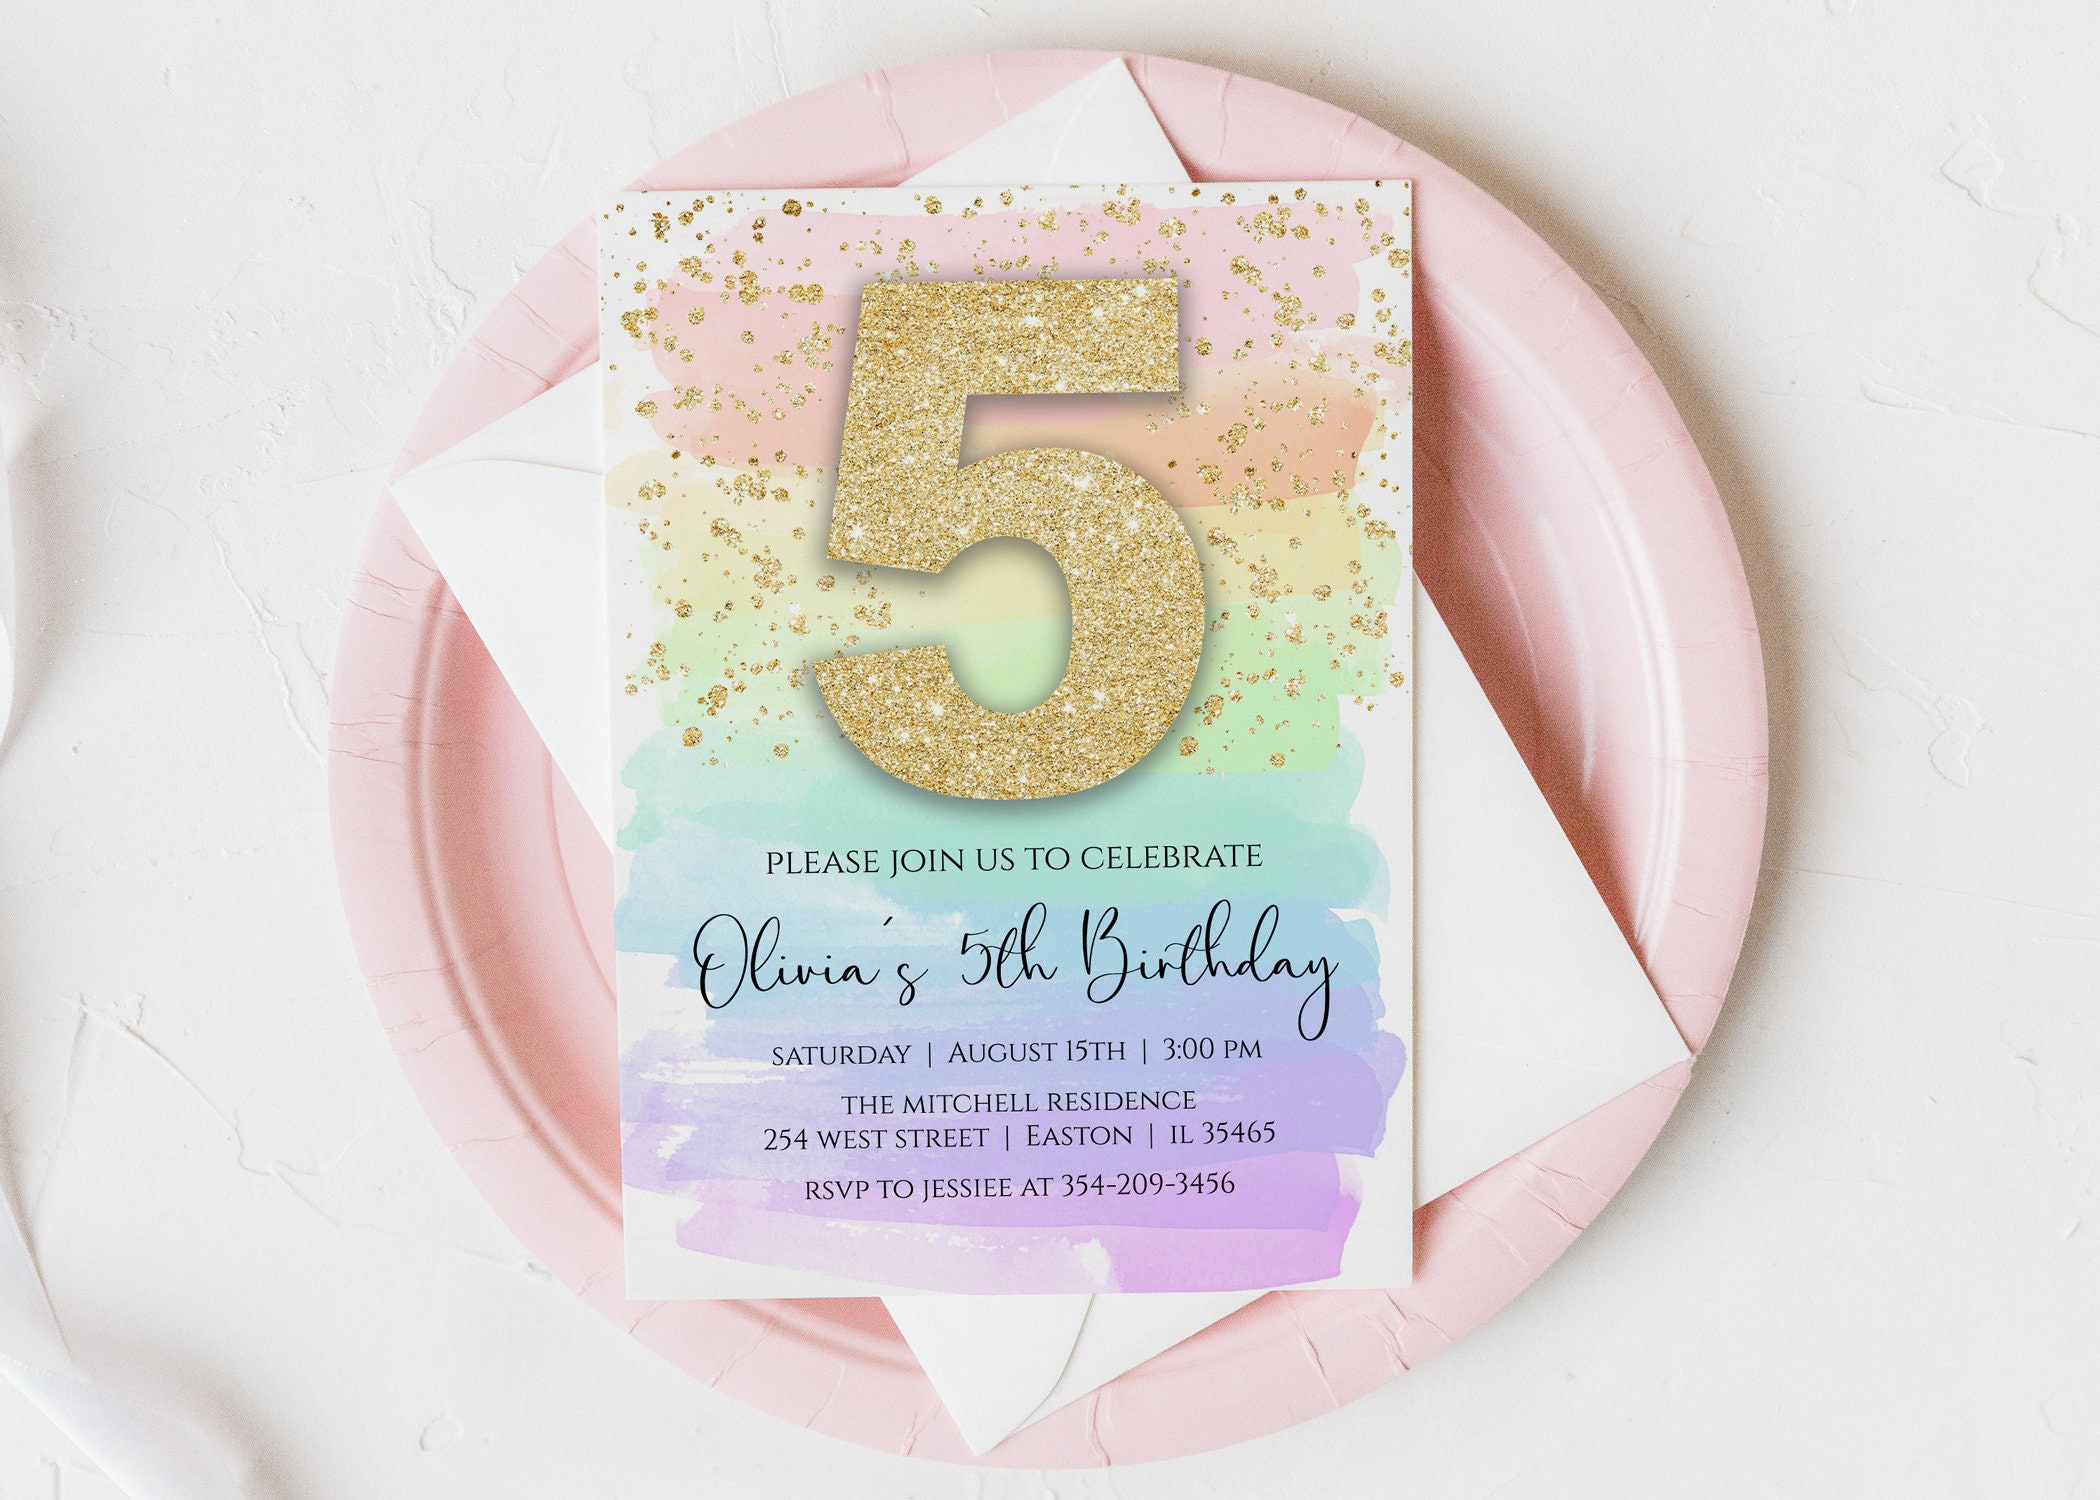 Rileys & Co 50 Party Invitation Cards With Envelopes And Bonus Stickers Kids Birthday Invitations For Boys And Girls With Cute Graphics 7x5 Inches